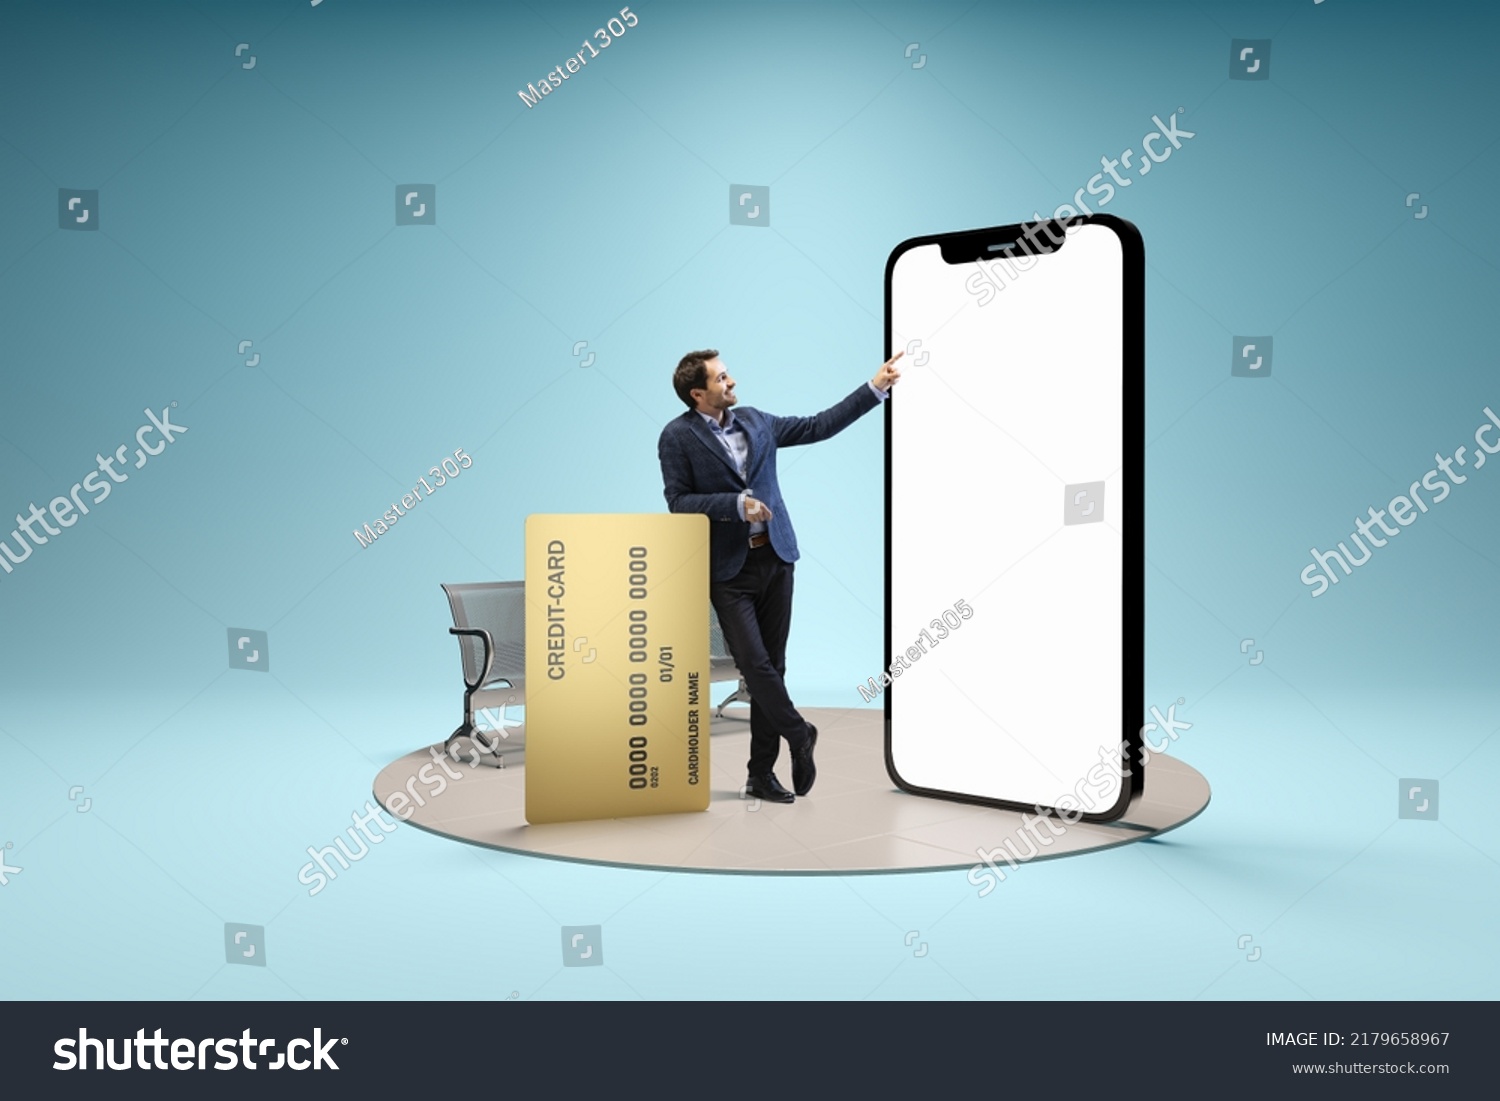 Financial app, online payment. Young man, businessman standing in front of 3d model of cellphone with blank white screen isolated on blue background. Online shopping, choice, ad, sales, #2179658967